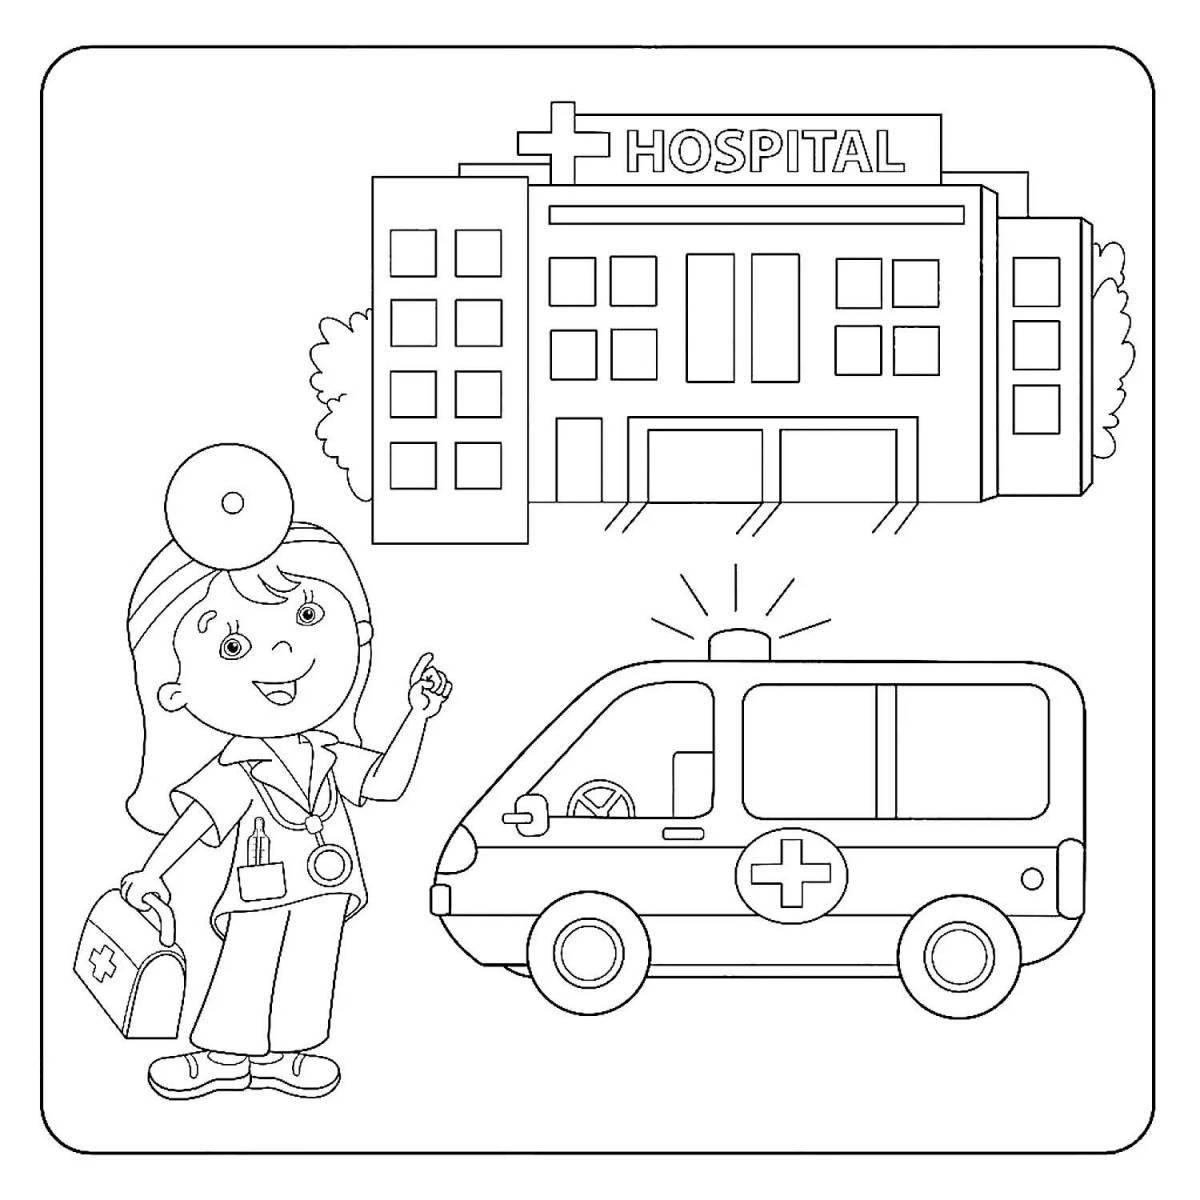 Colourful hospital coloring book for kids